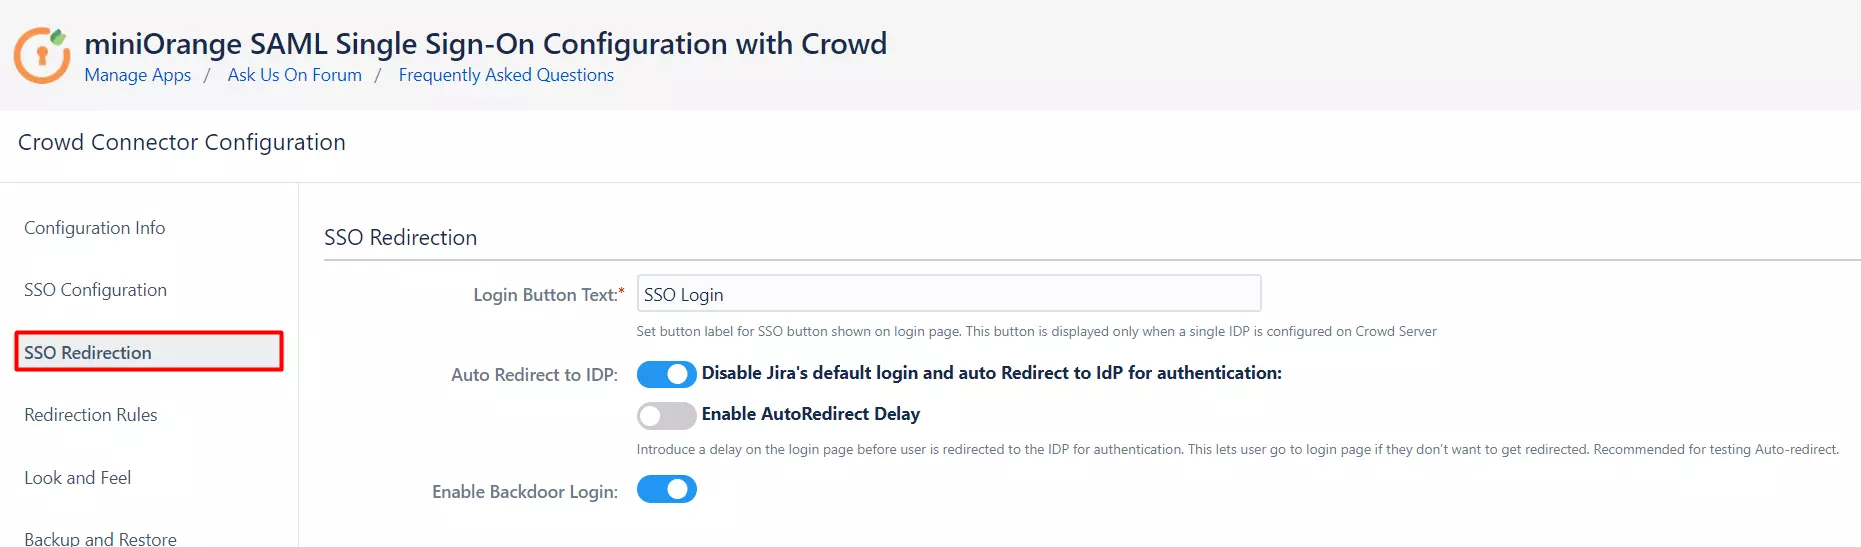 SAML Single Sign On (SSO) Connector for Crowd and Bamboo, SSO Redirection